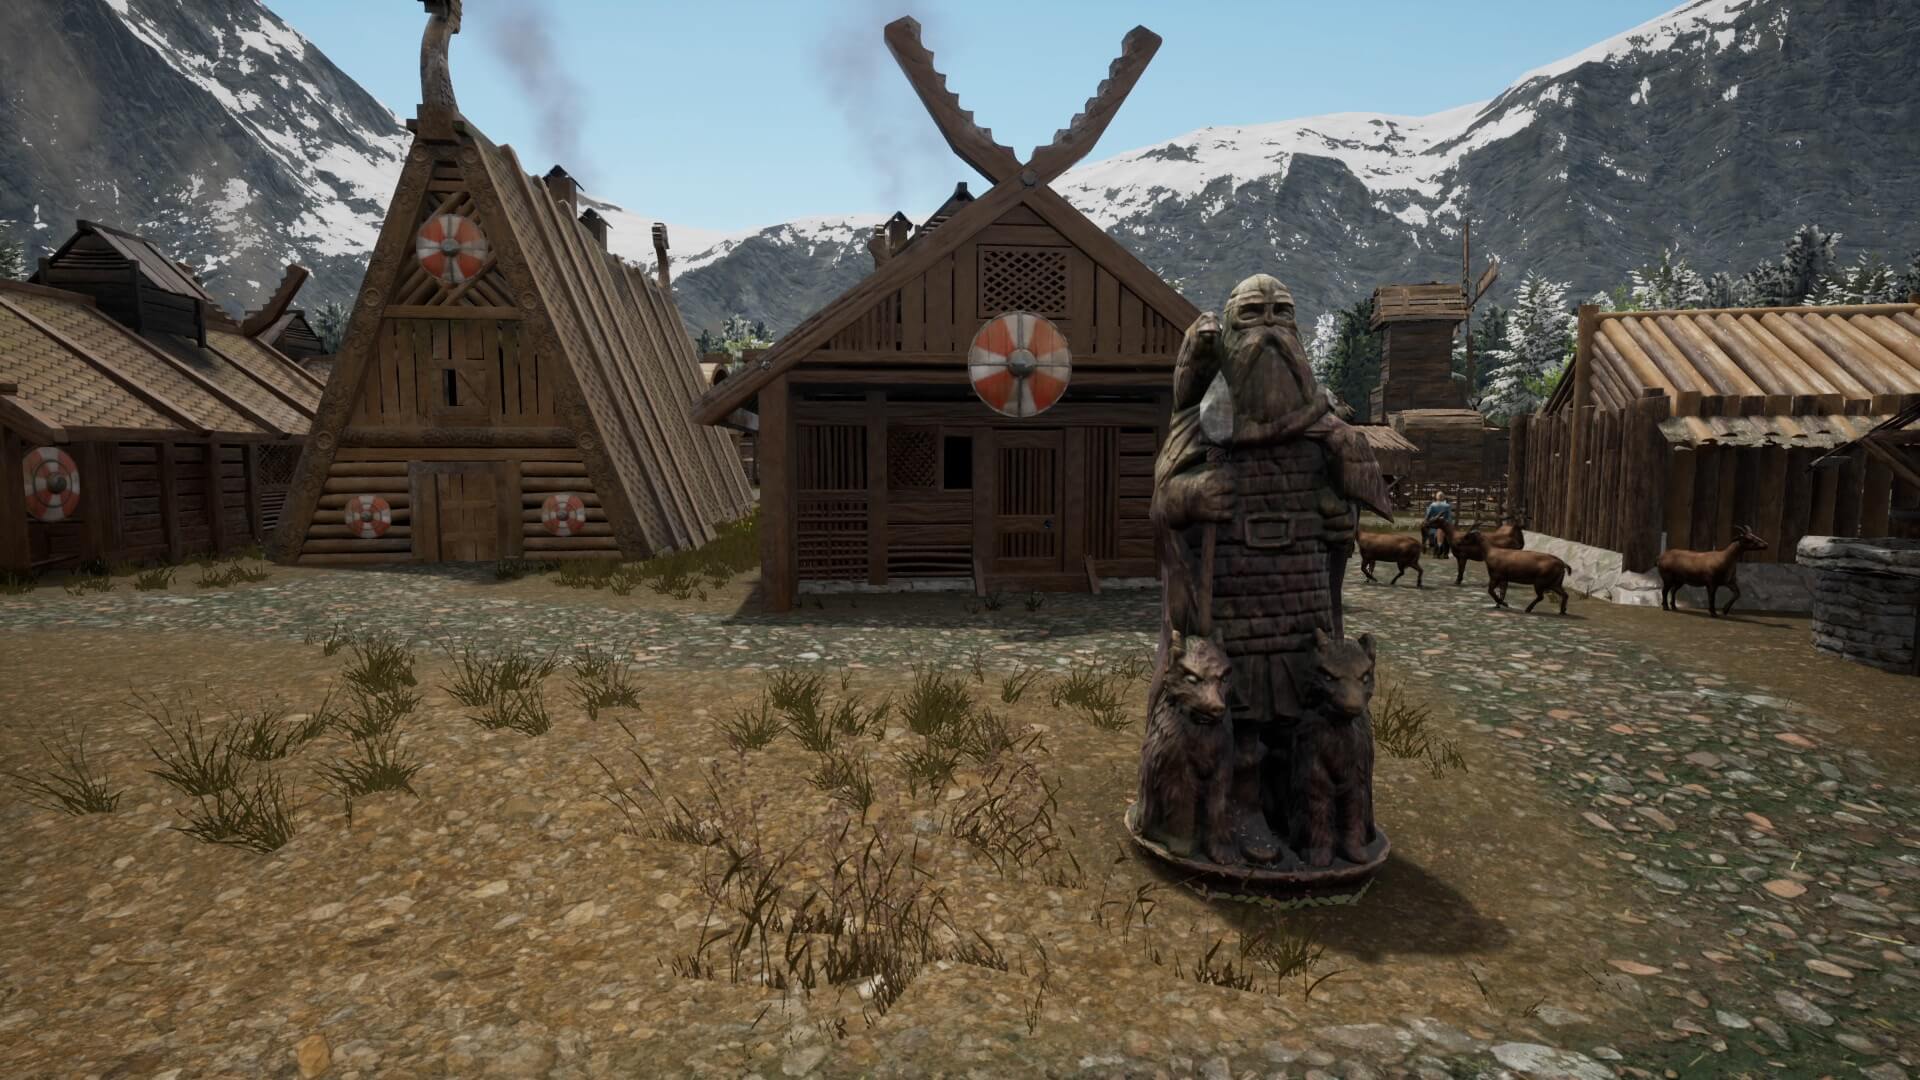 Land of the Vikings screenshot showing a viking village, animals, and a cool statue.